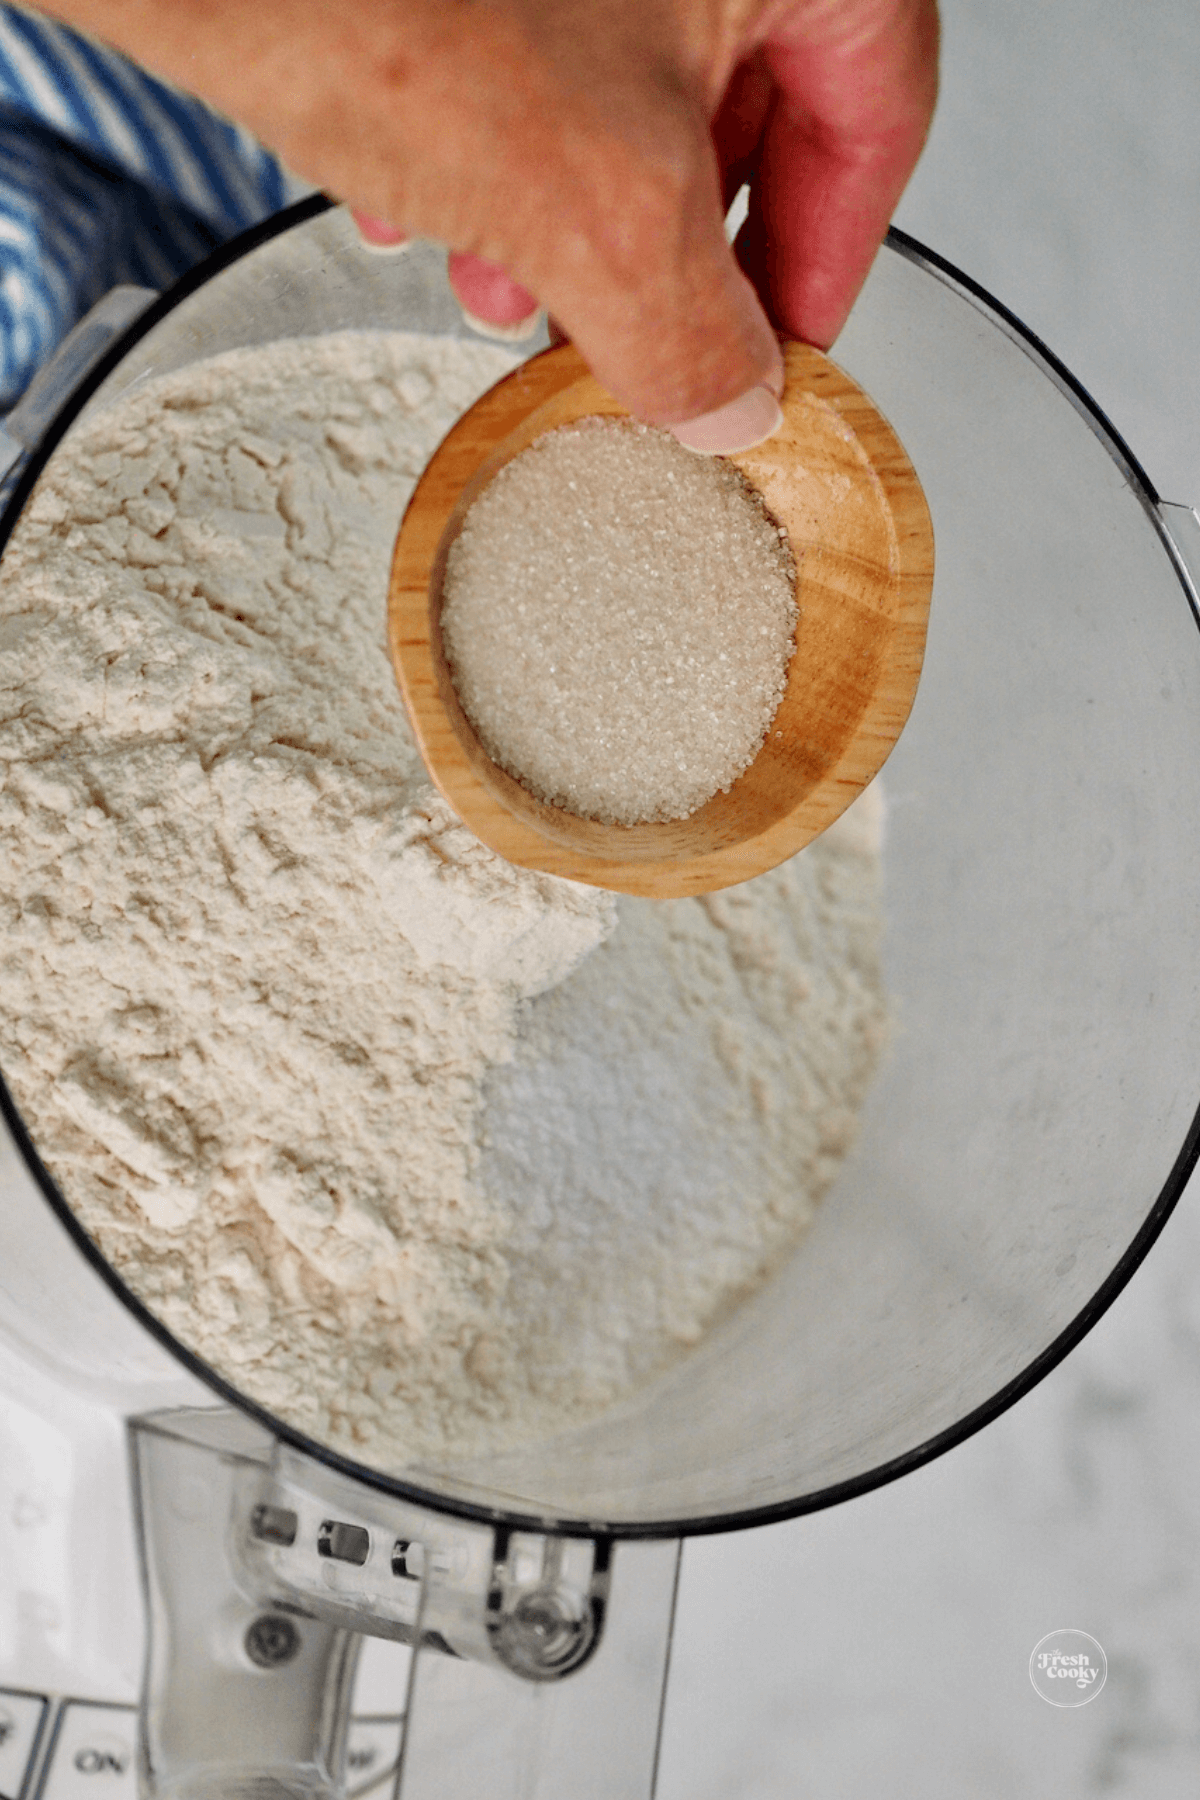 Combine and pulse dry ingredients in food processor. 